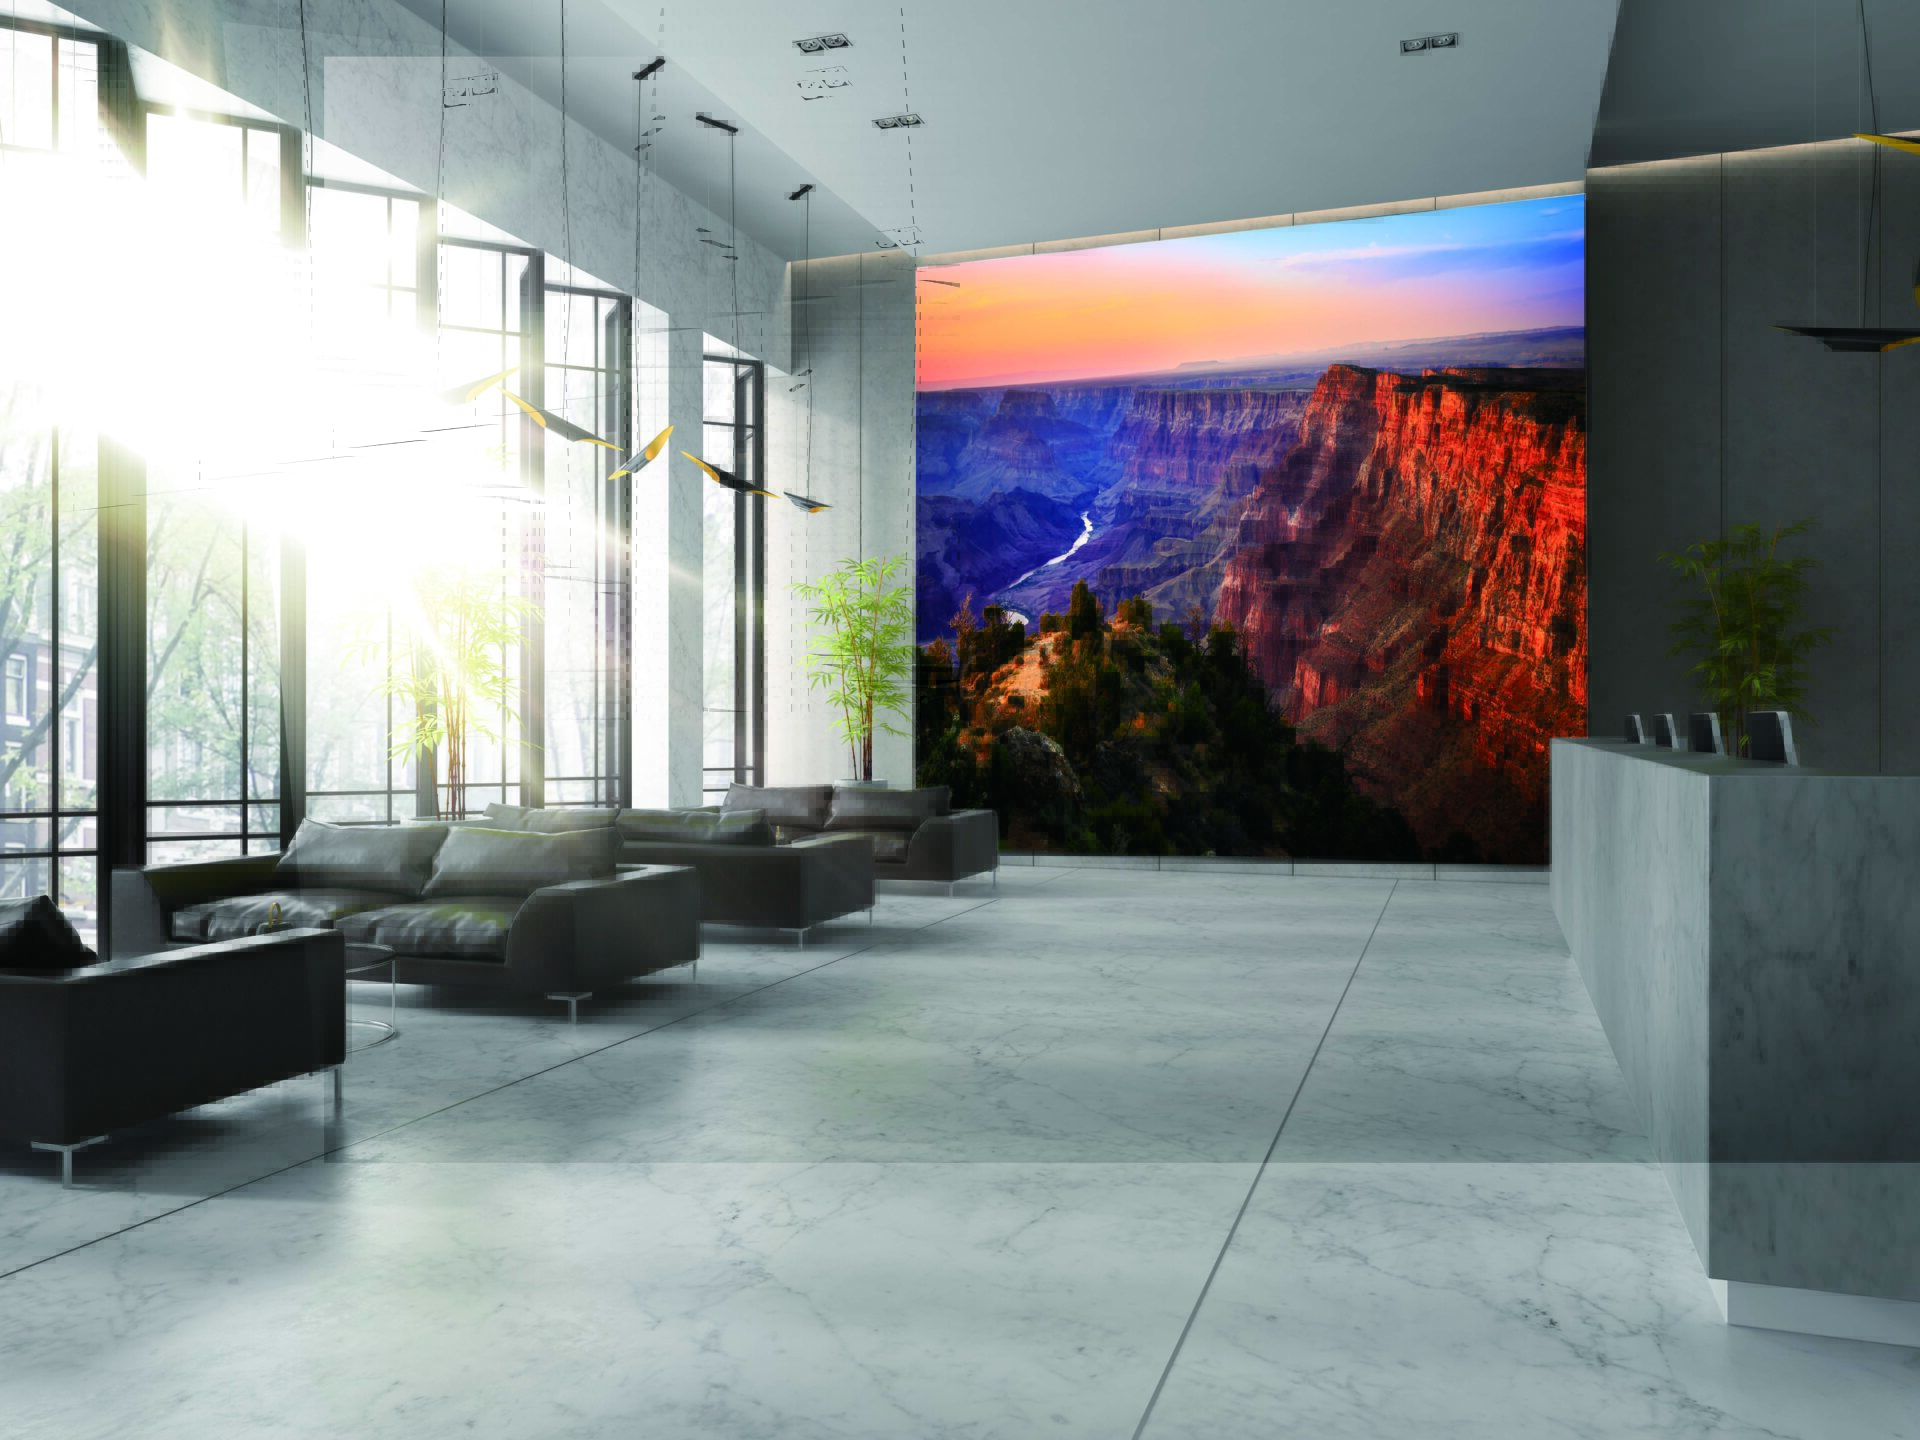 Samsung video wall display in a lobby